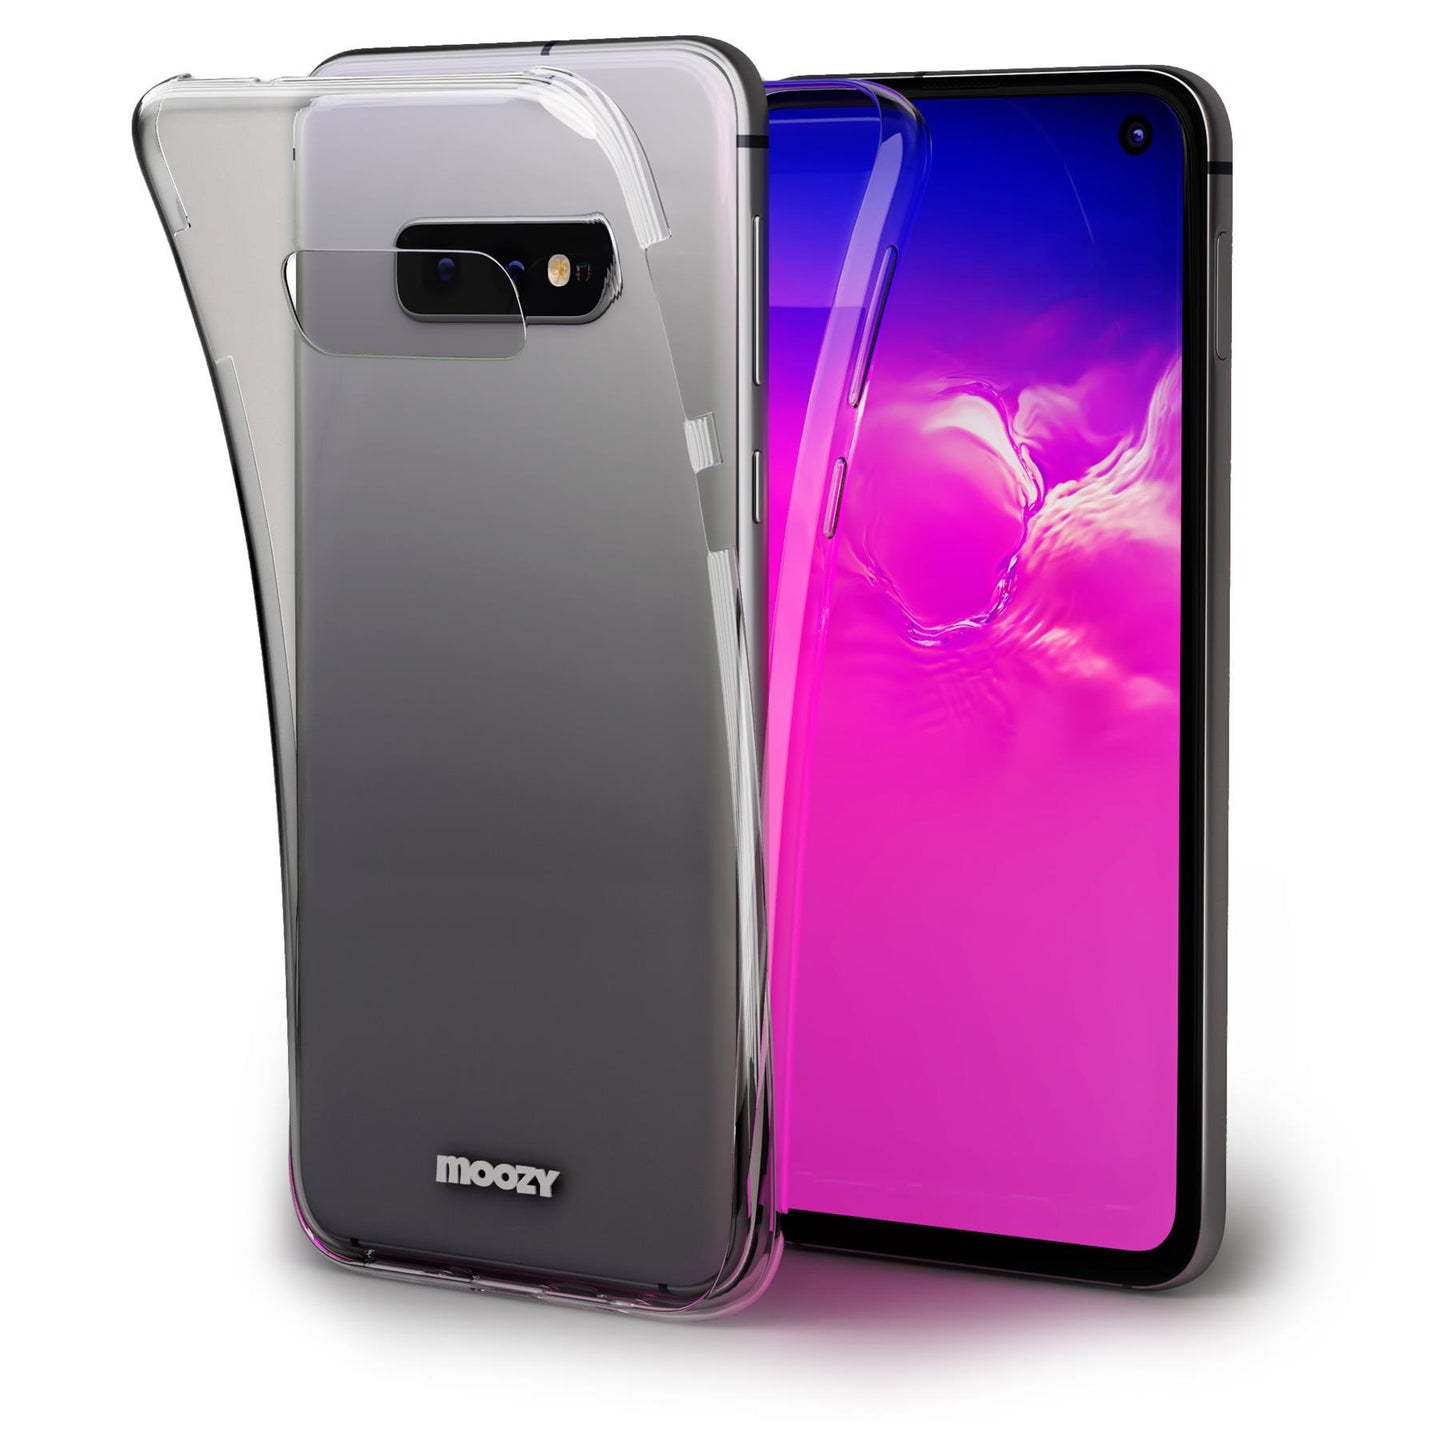 Moozy 360 Degree Case for Samsung S10e, Galaxy S10e - Full body Front and Back Slim Clear Transparent TPU Silicone Gel Cover